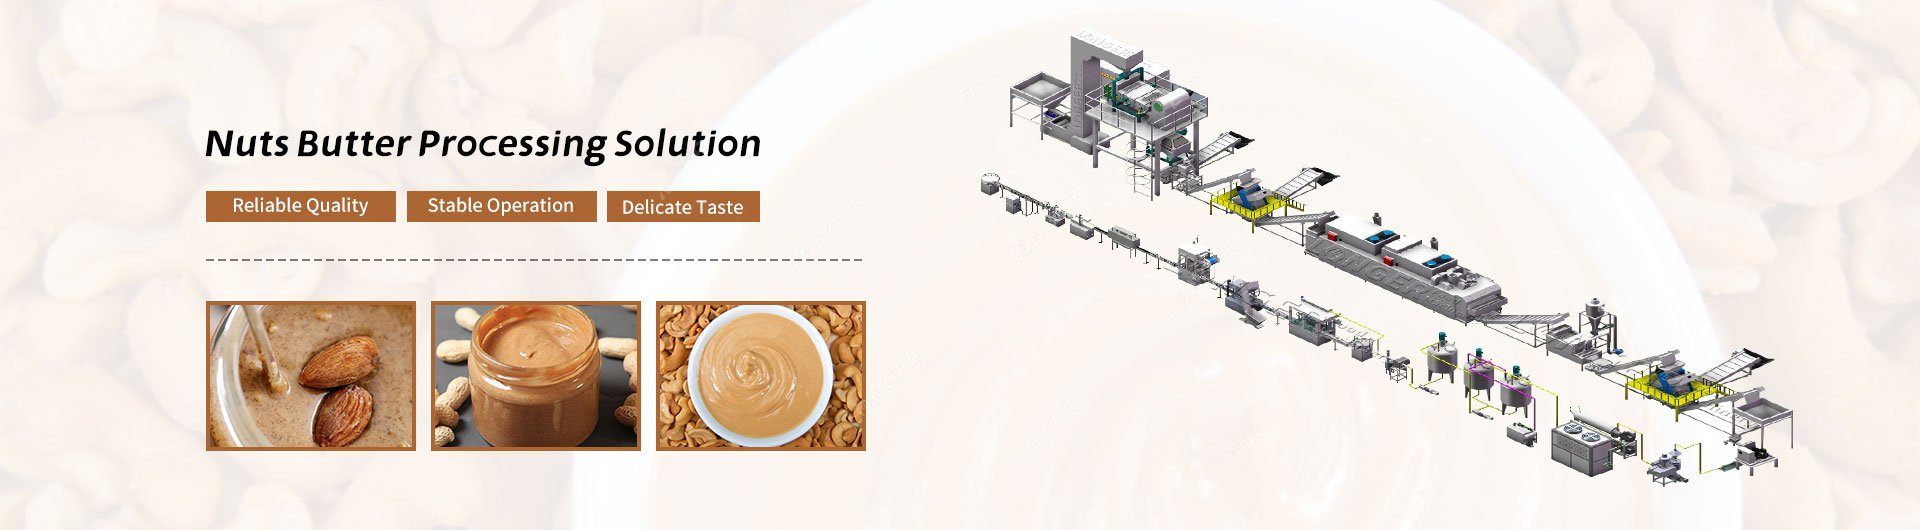 Nuts Butter Processing Solution